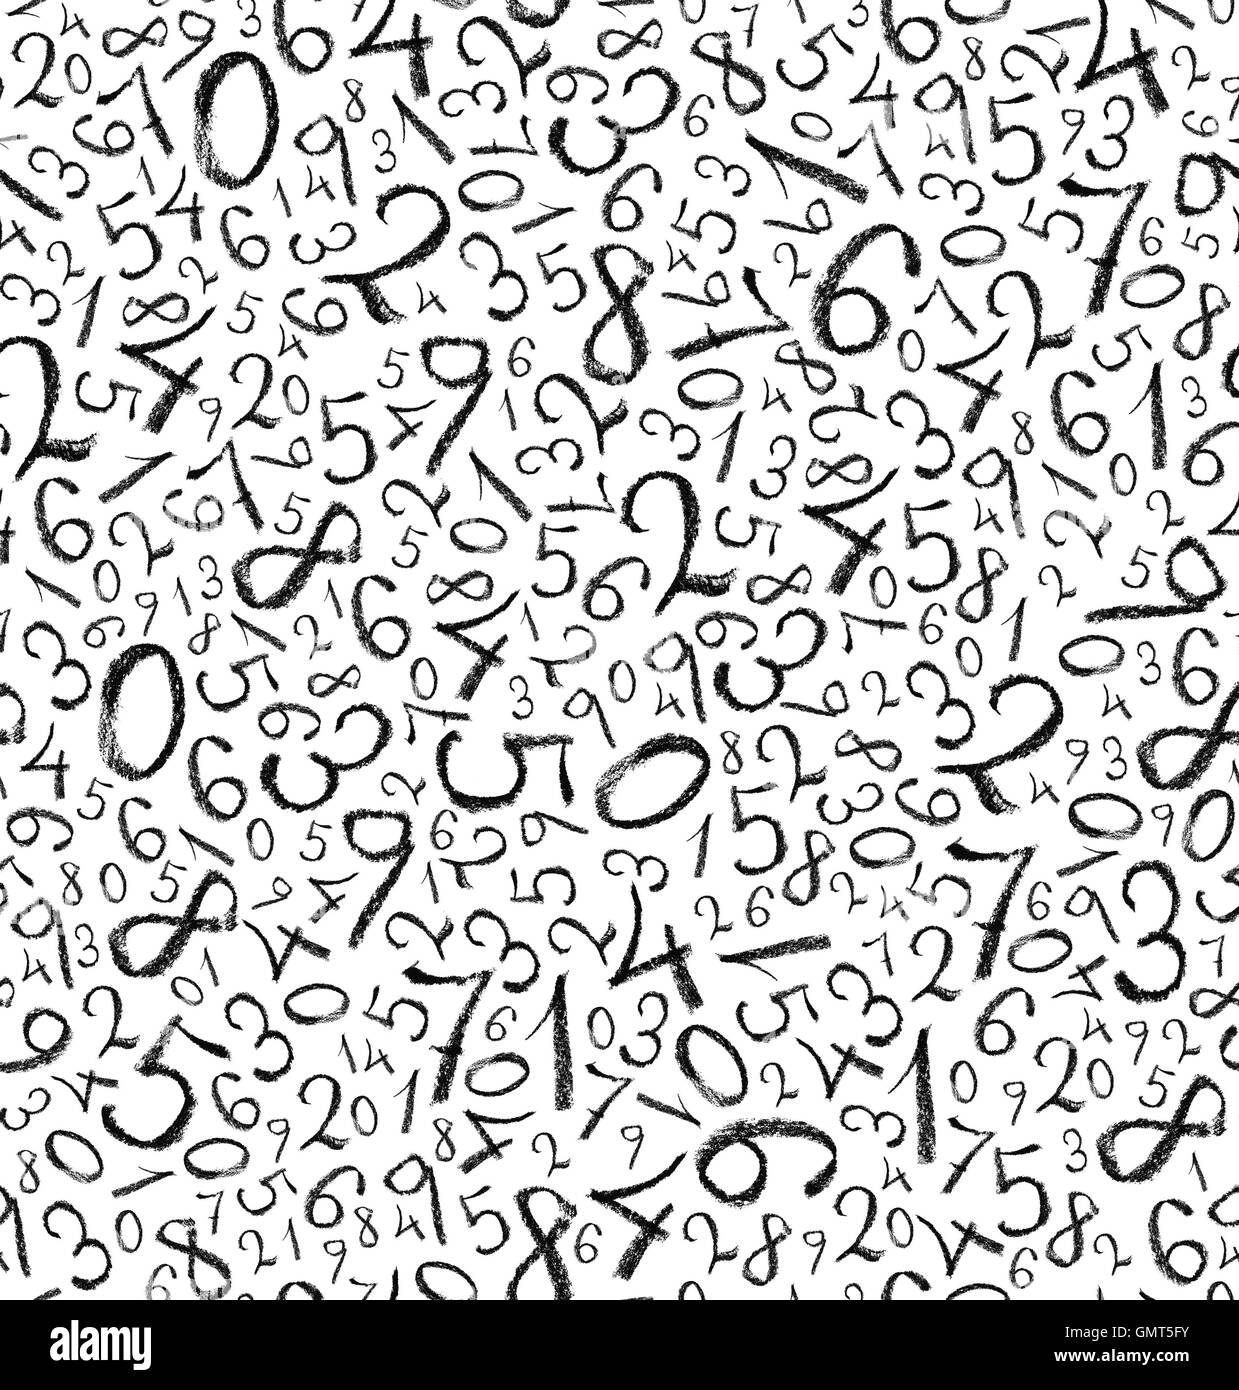 Numbers Black and White Stock Photos & Images - Alamy